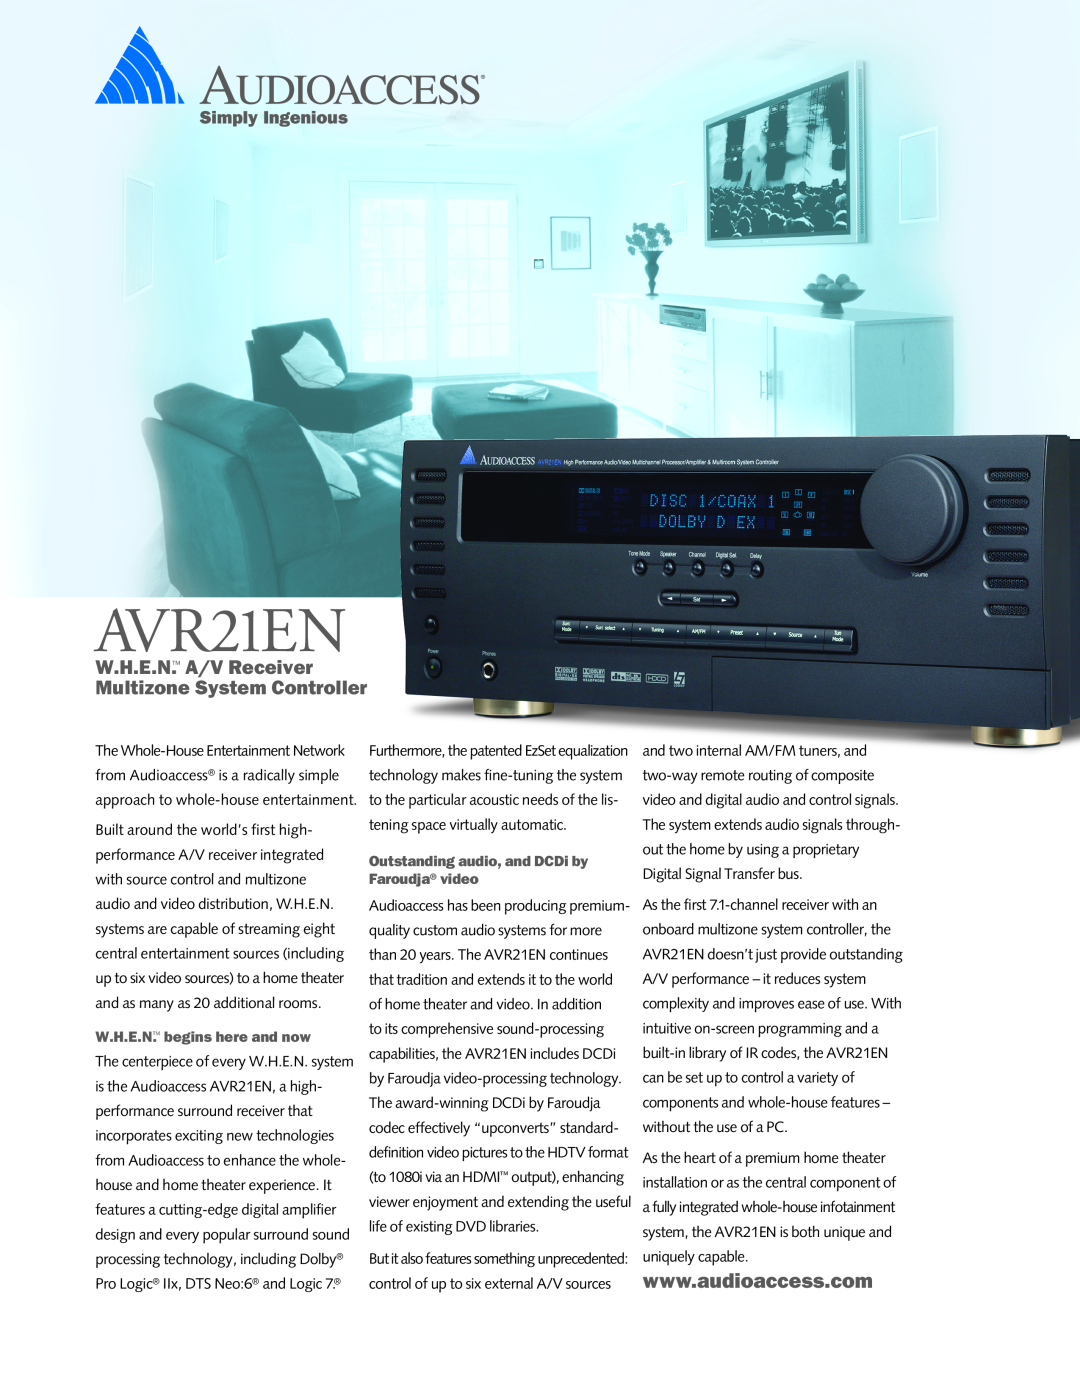 Audioaccess AVR21EN manual W.H.E.N. A/V Receiver Multizone System Controller, W.H.E.N. begins here and now 